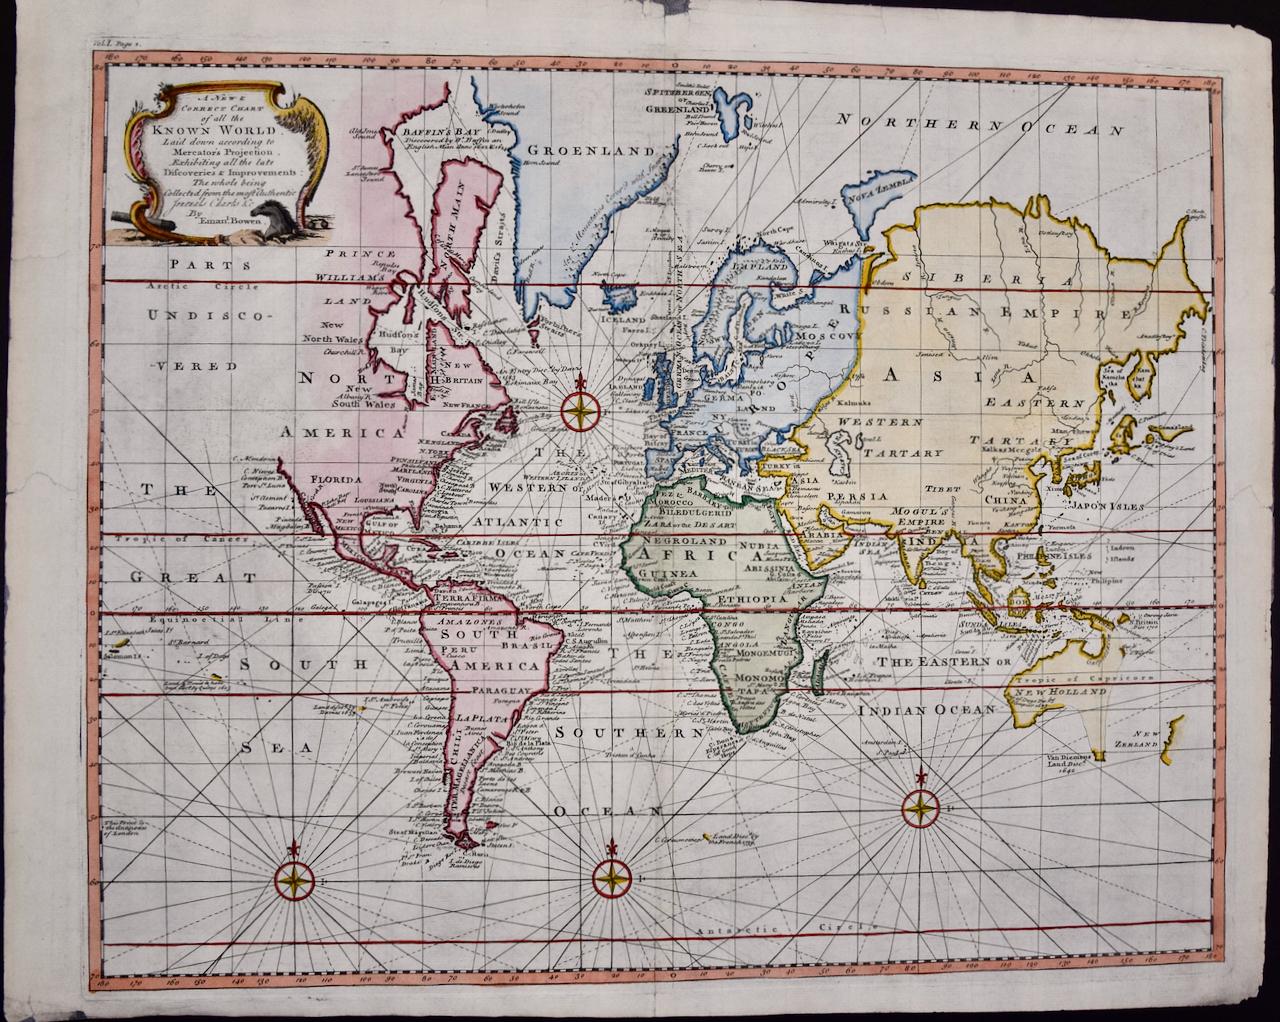 Emanuel Bowen Print - Map of the World: An Original 18th Century Hand-colored Map by E. Bowen